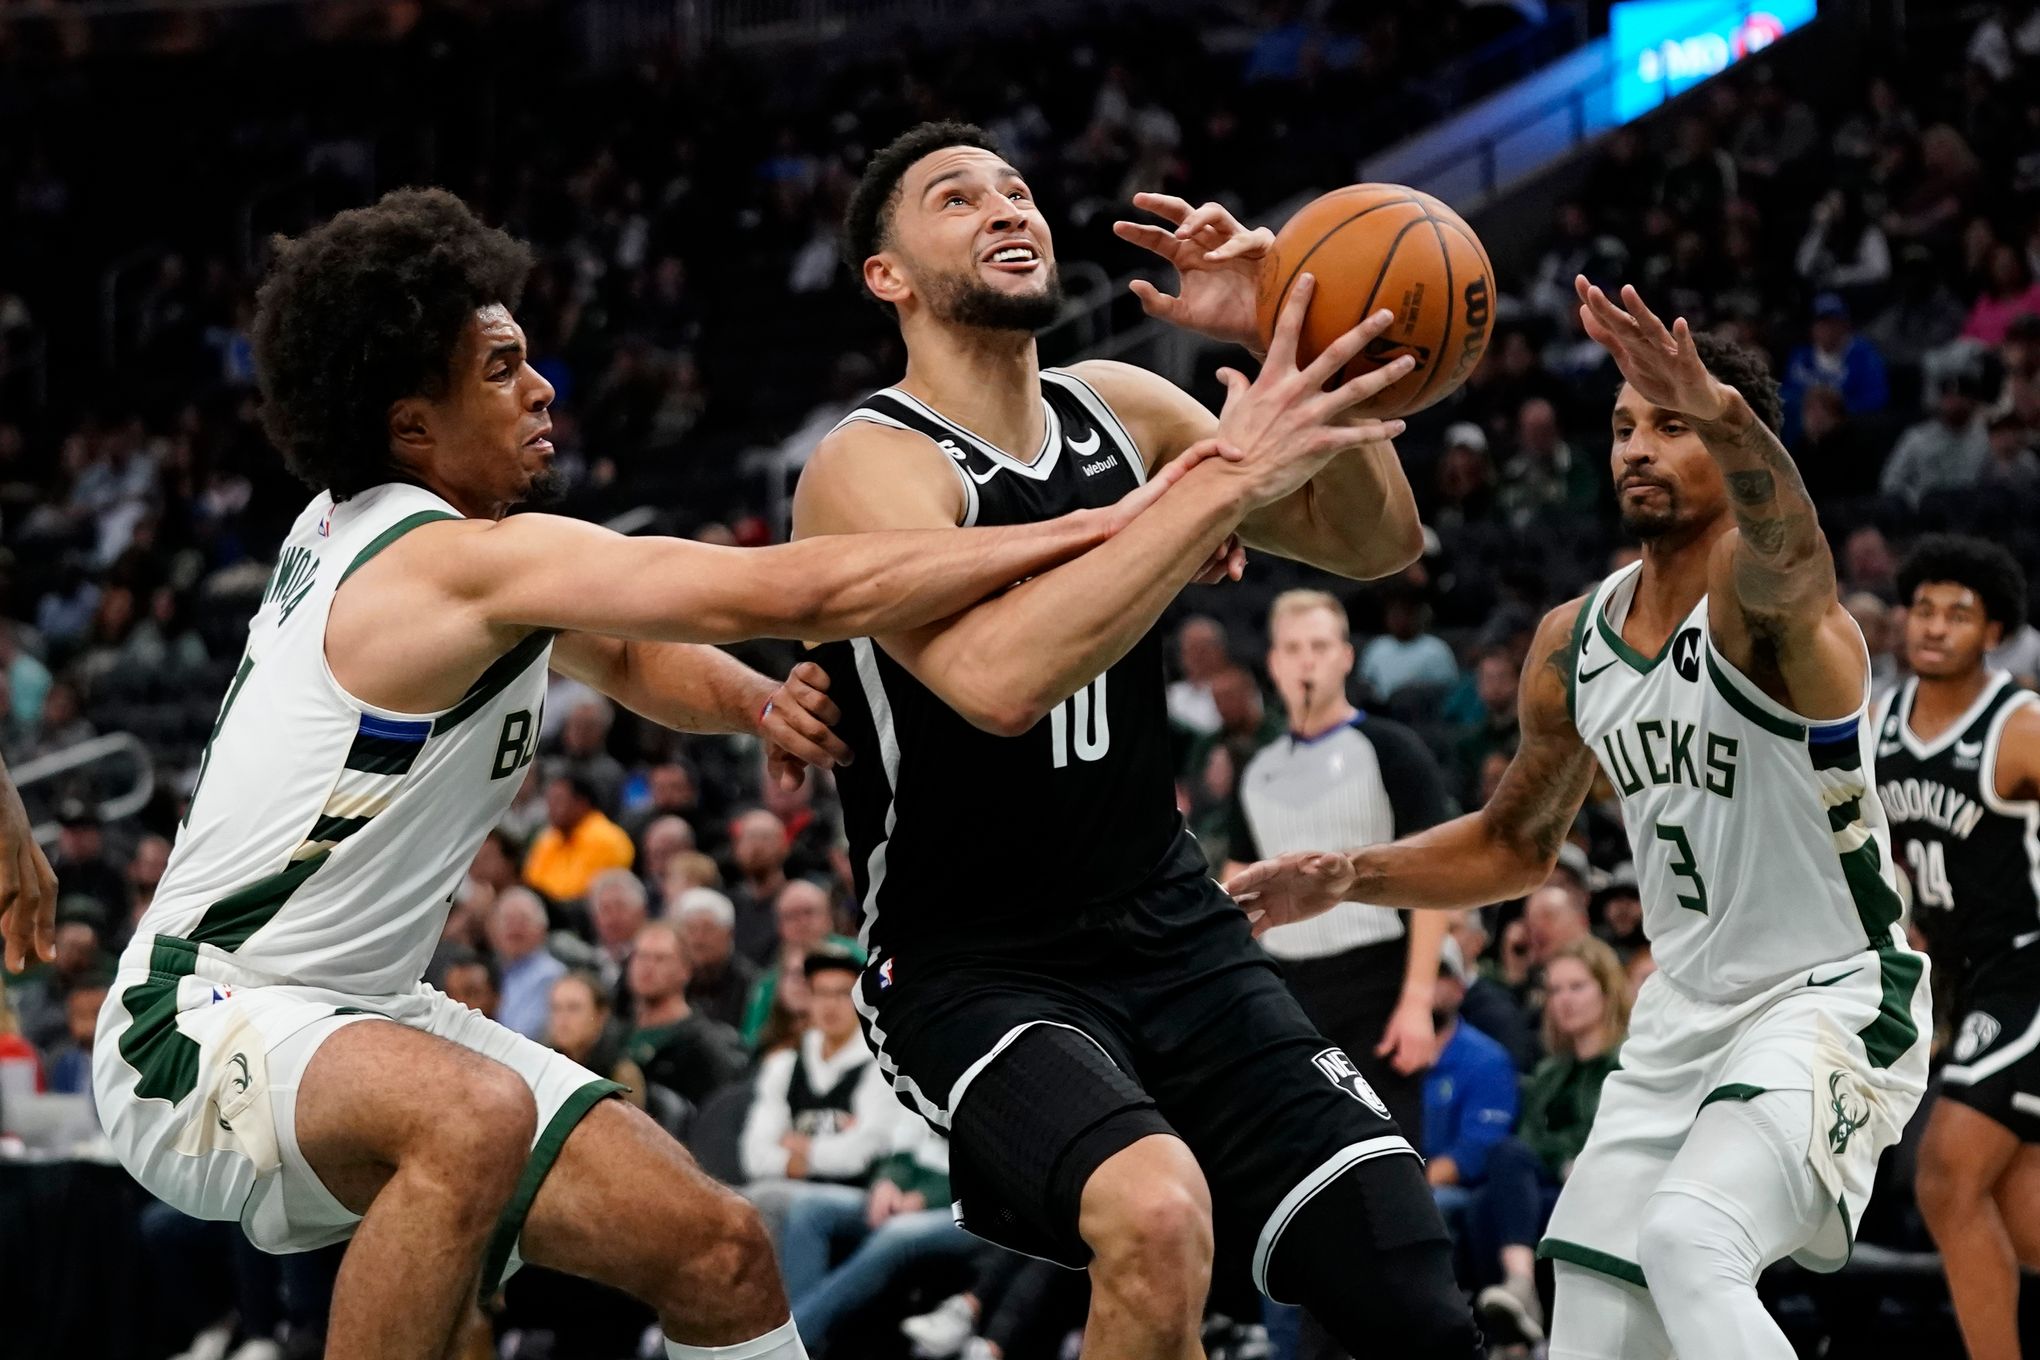 Ben Simmons Finally Plays, but the Nets Lose - The New York Times